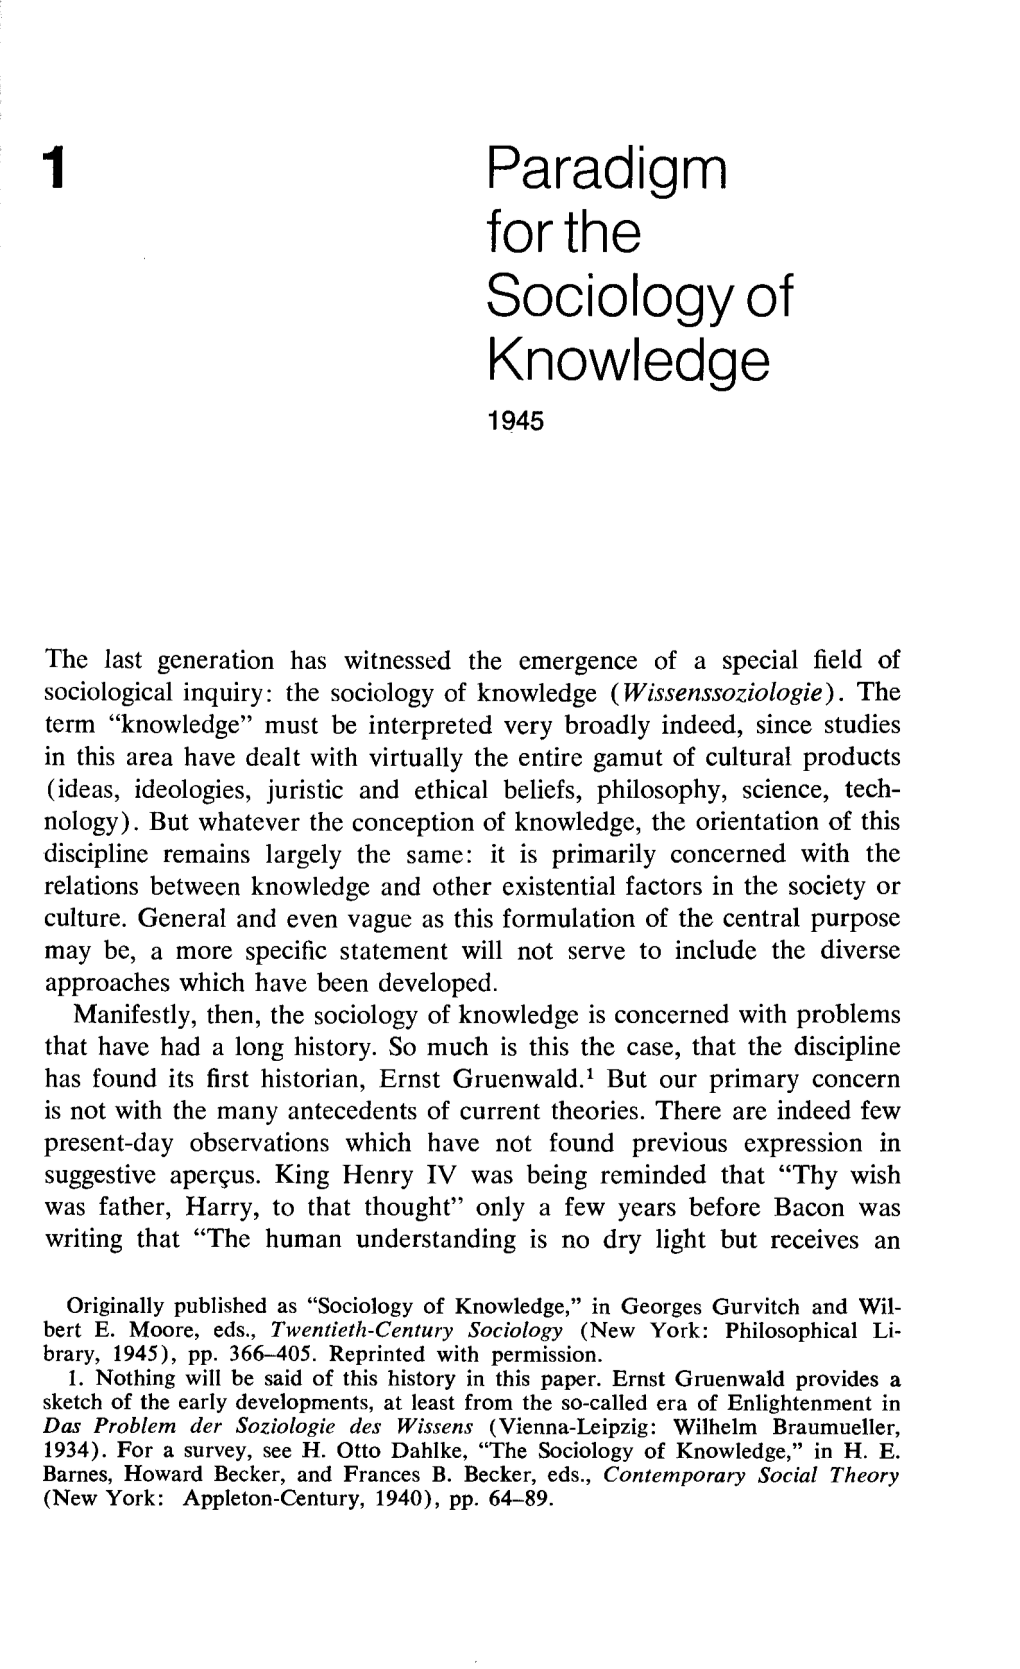 Paradigm for the Sociology of Knowledge 1945